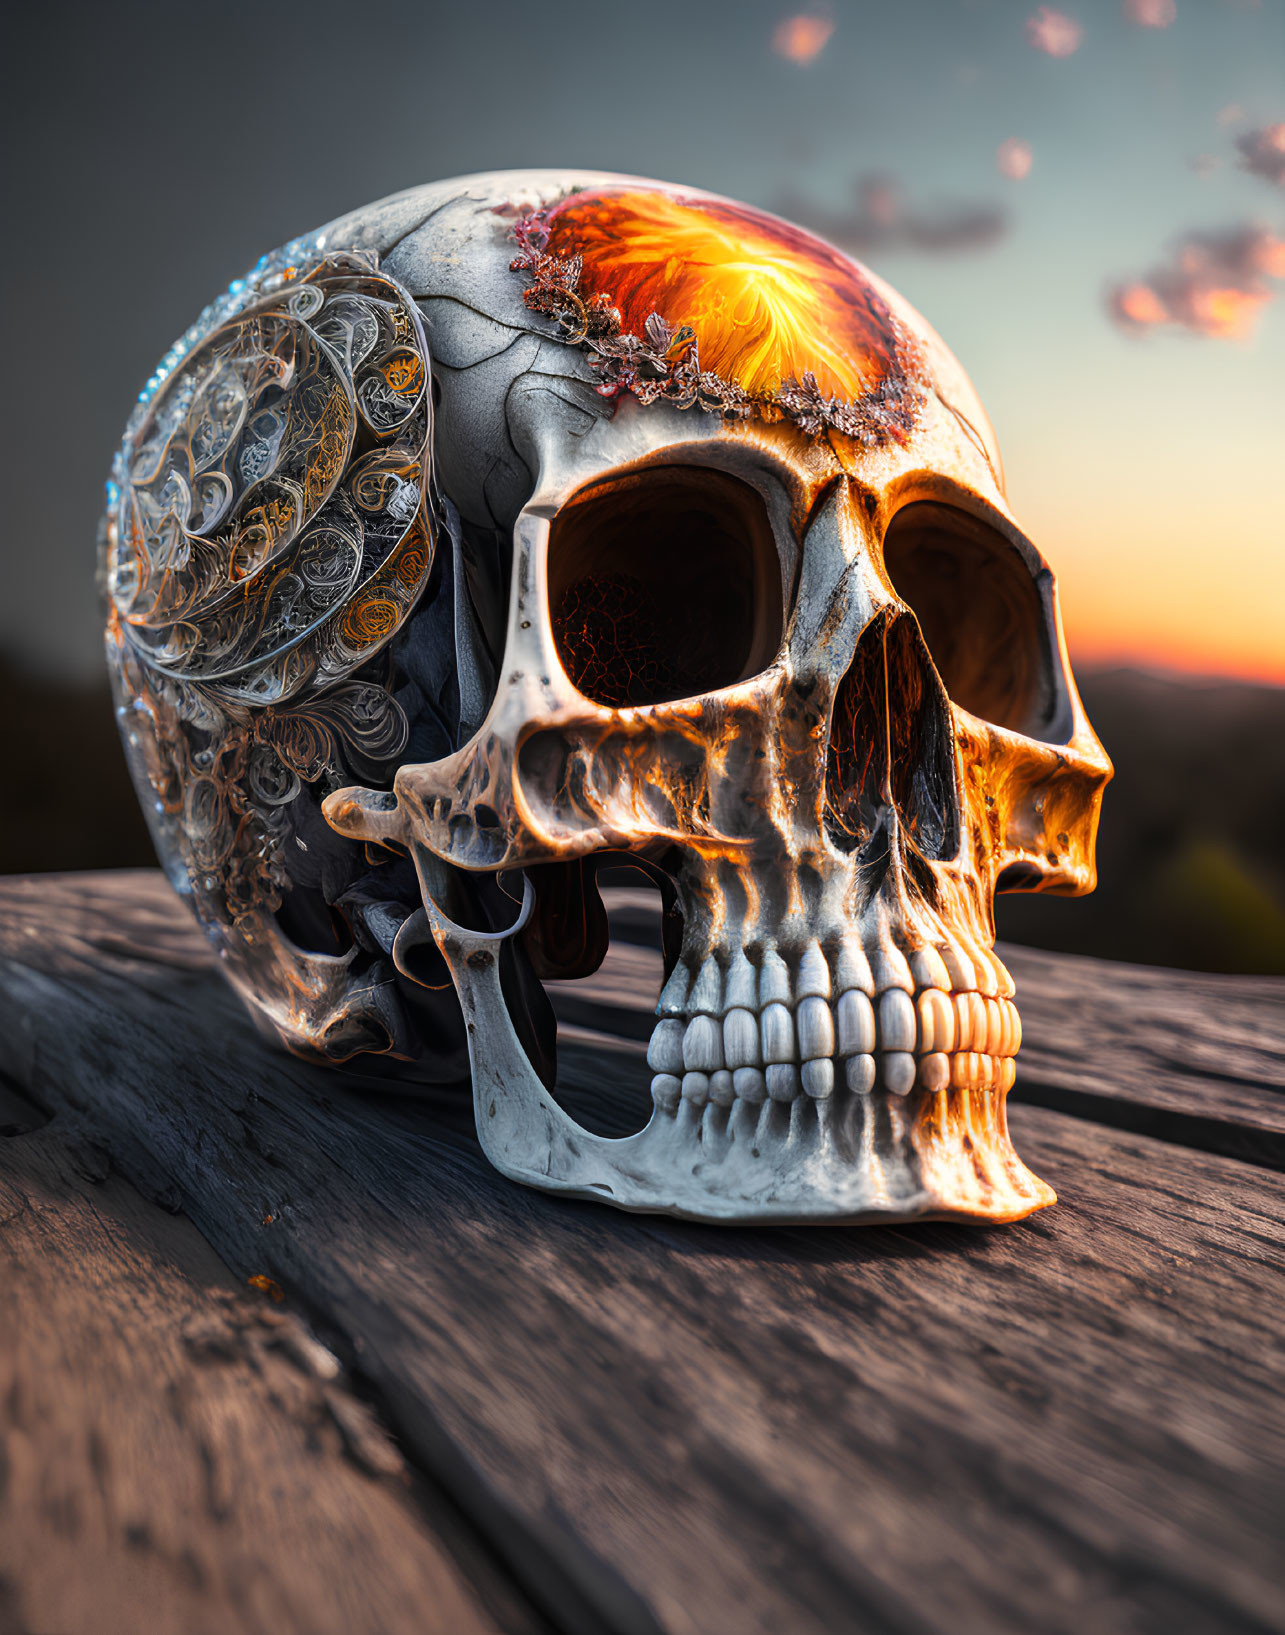 Intricately engraved decorative skull with fiery orange embellishment on wooden surface against sunset backdrop